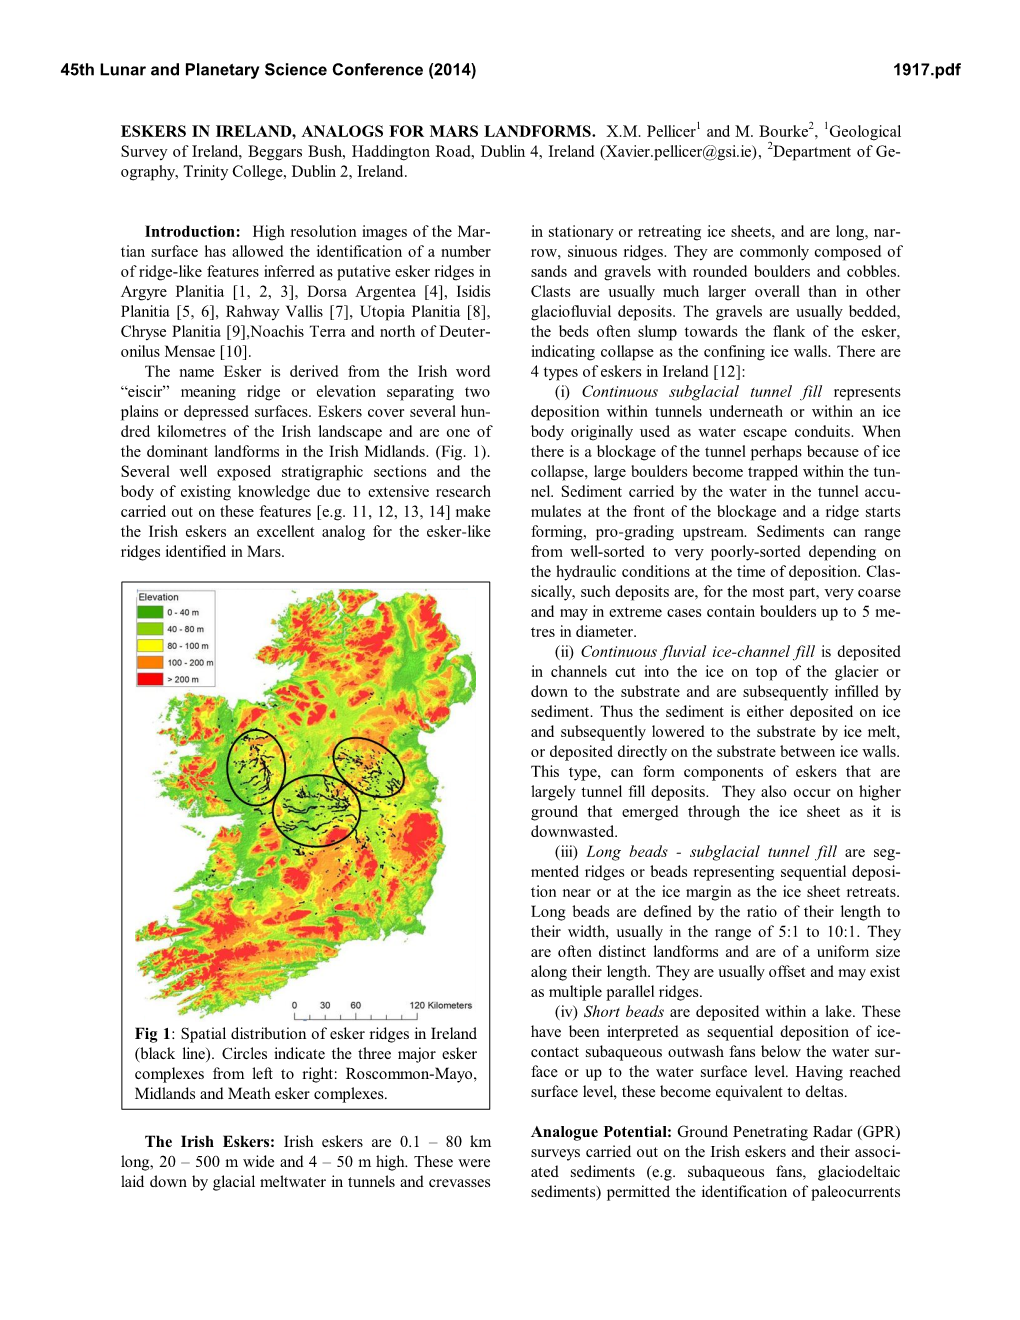 ESKERS in IRELAND, ANALOGS for MARS LANDFORMS. X.M. Pellicer1 and M